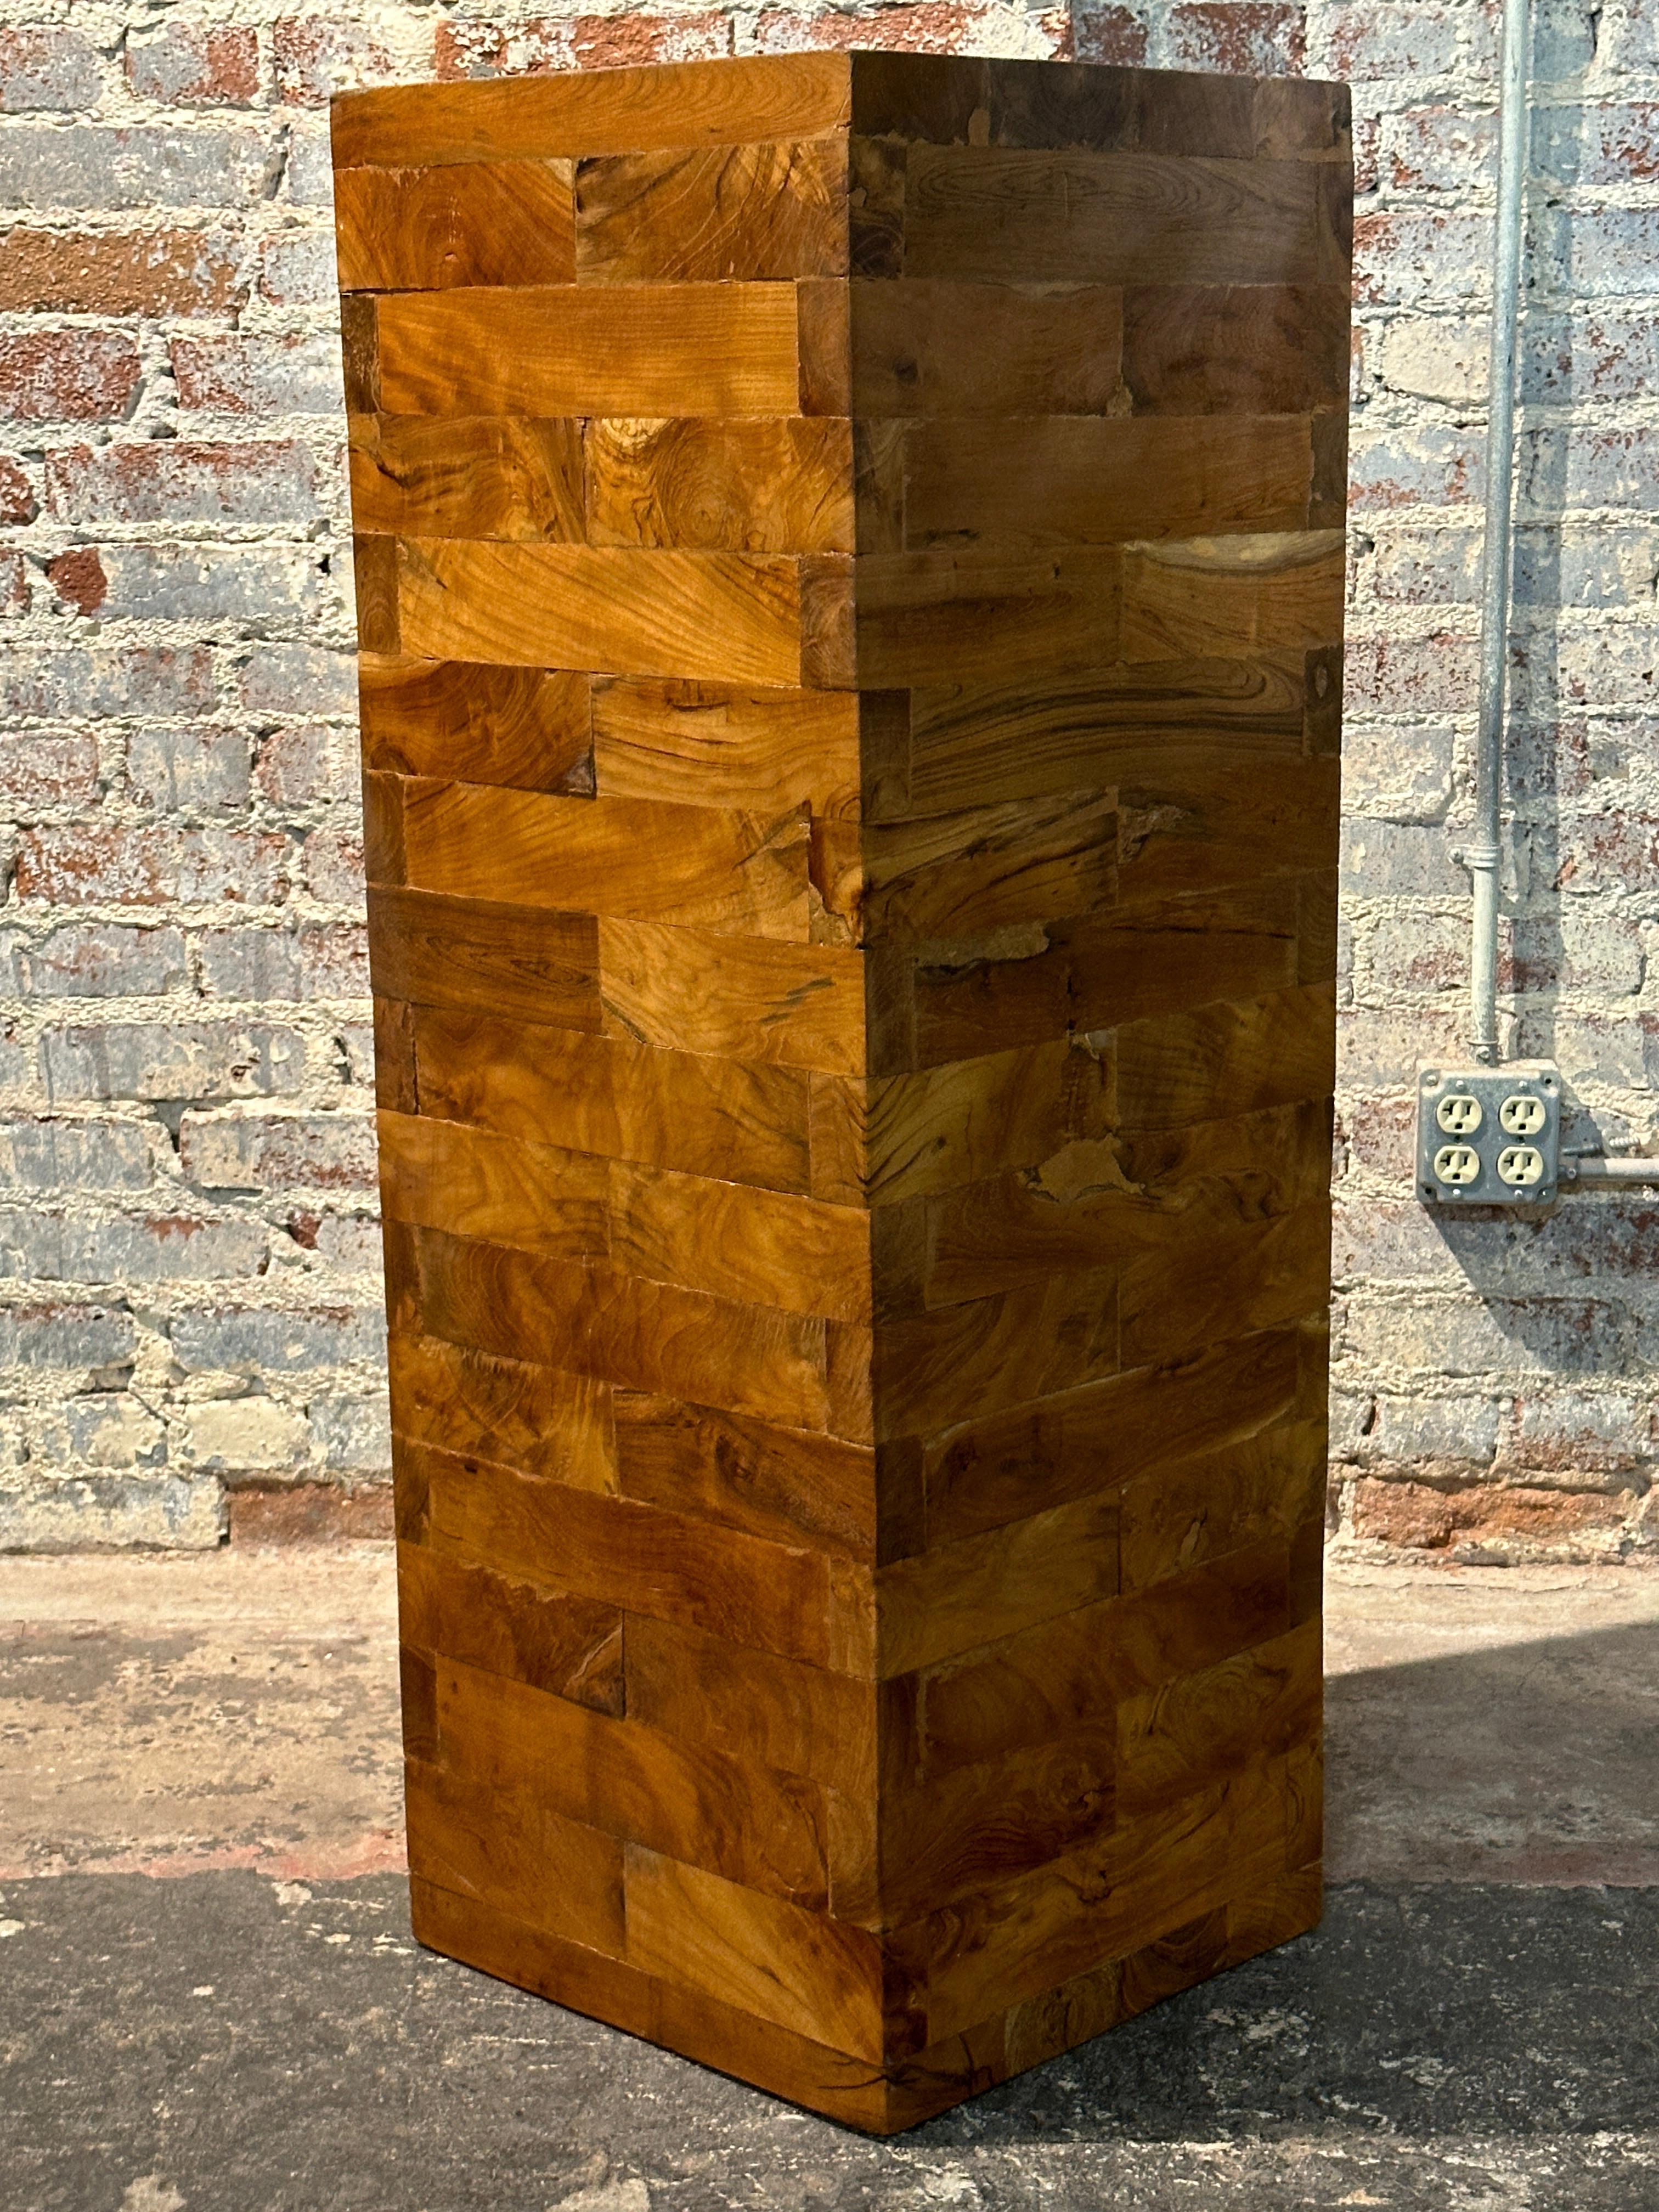 This Pair of Brutalist Walnut Pedestals/Benches inspired maybe by Milo  Baughman  showcase the timeless beauty of natural species of different woods. 

The rectangular solid wood blocks are meticulously assembled to form each pedestal. Thanks to the